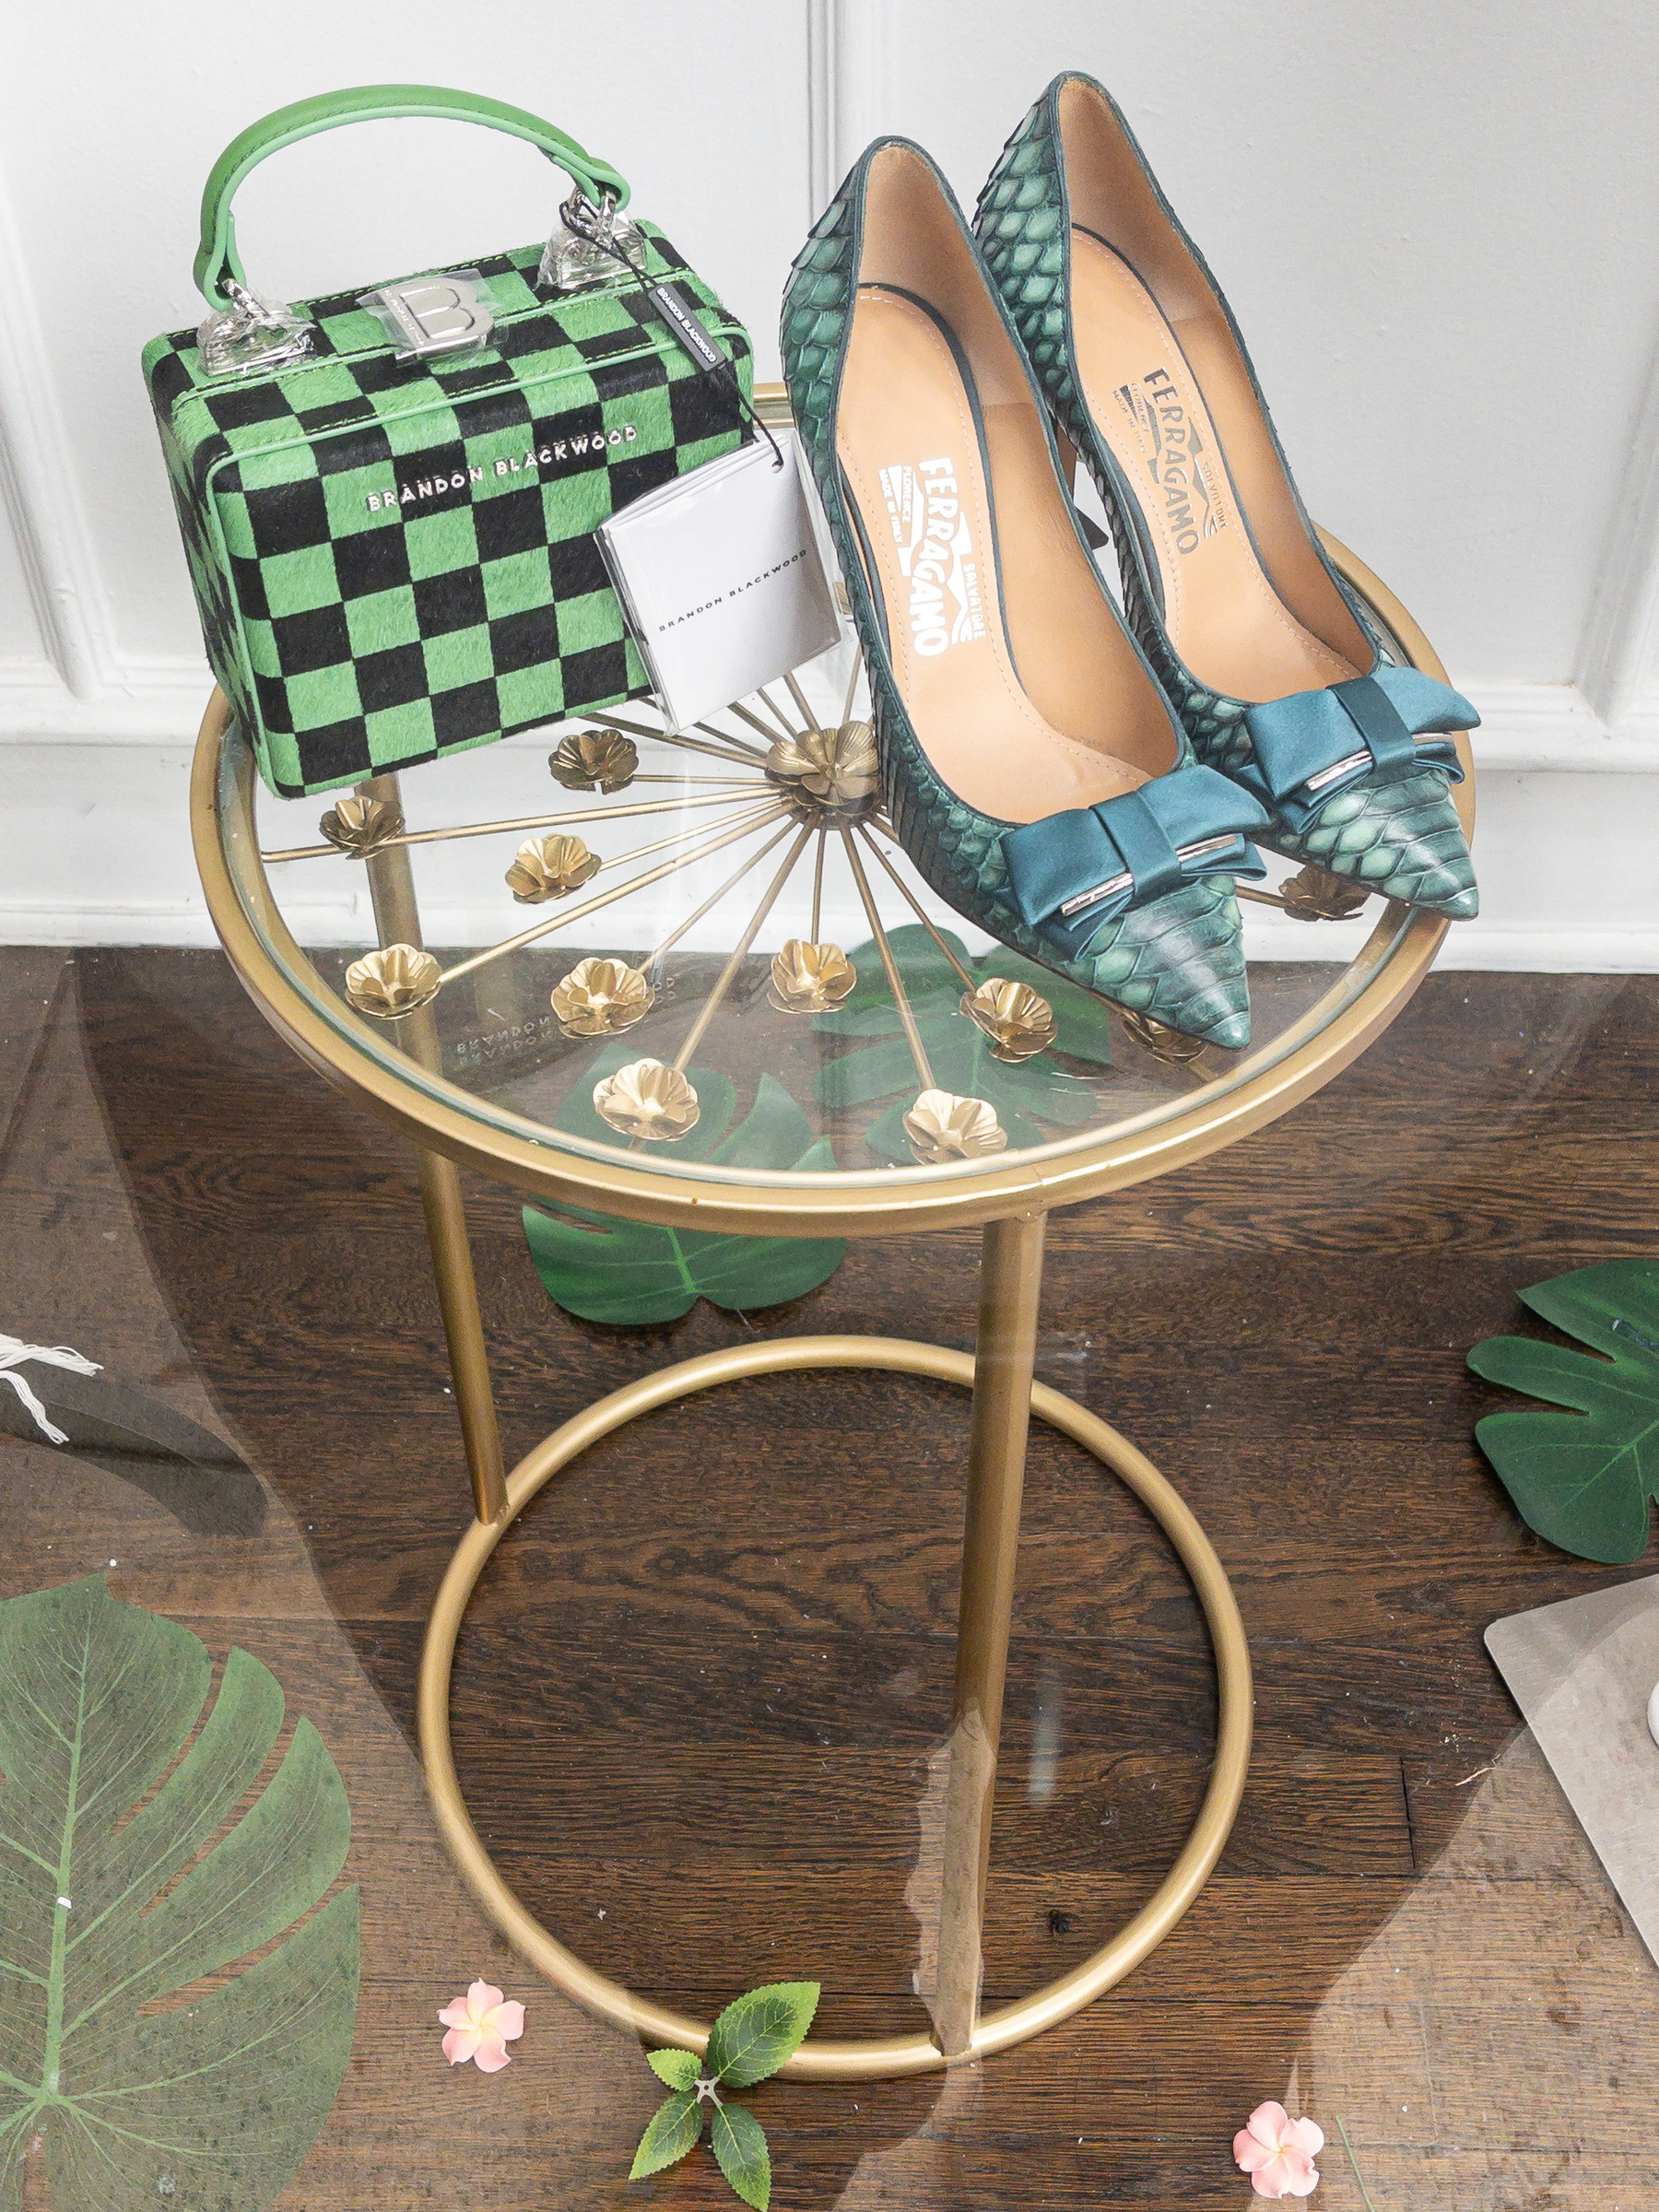 Women’s green shoes and green checkered handbag sitting on an Ilene Gray circles side table in a shop window.